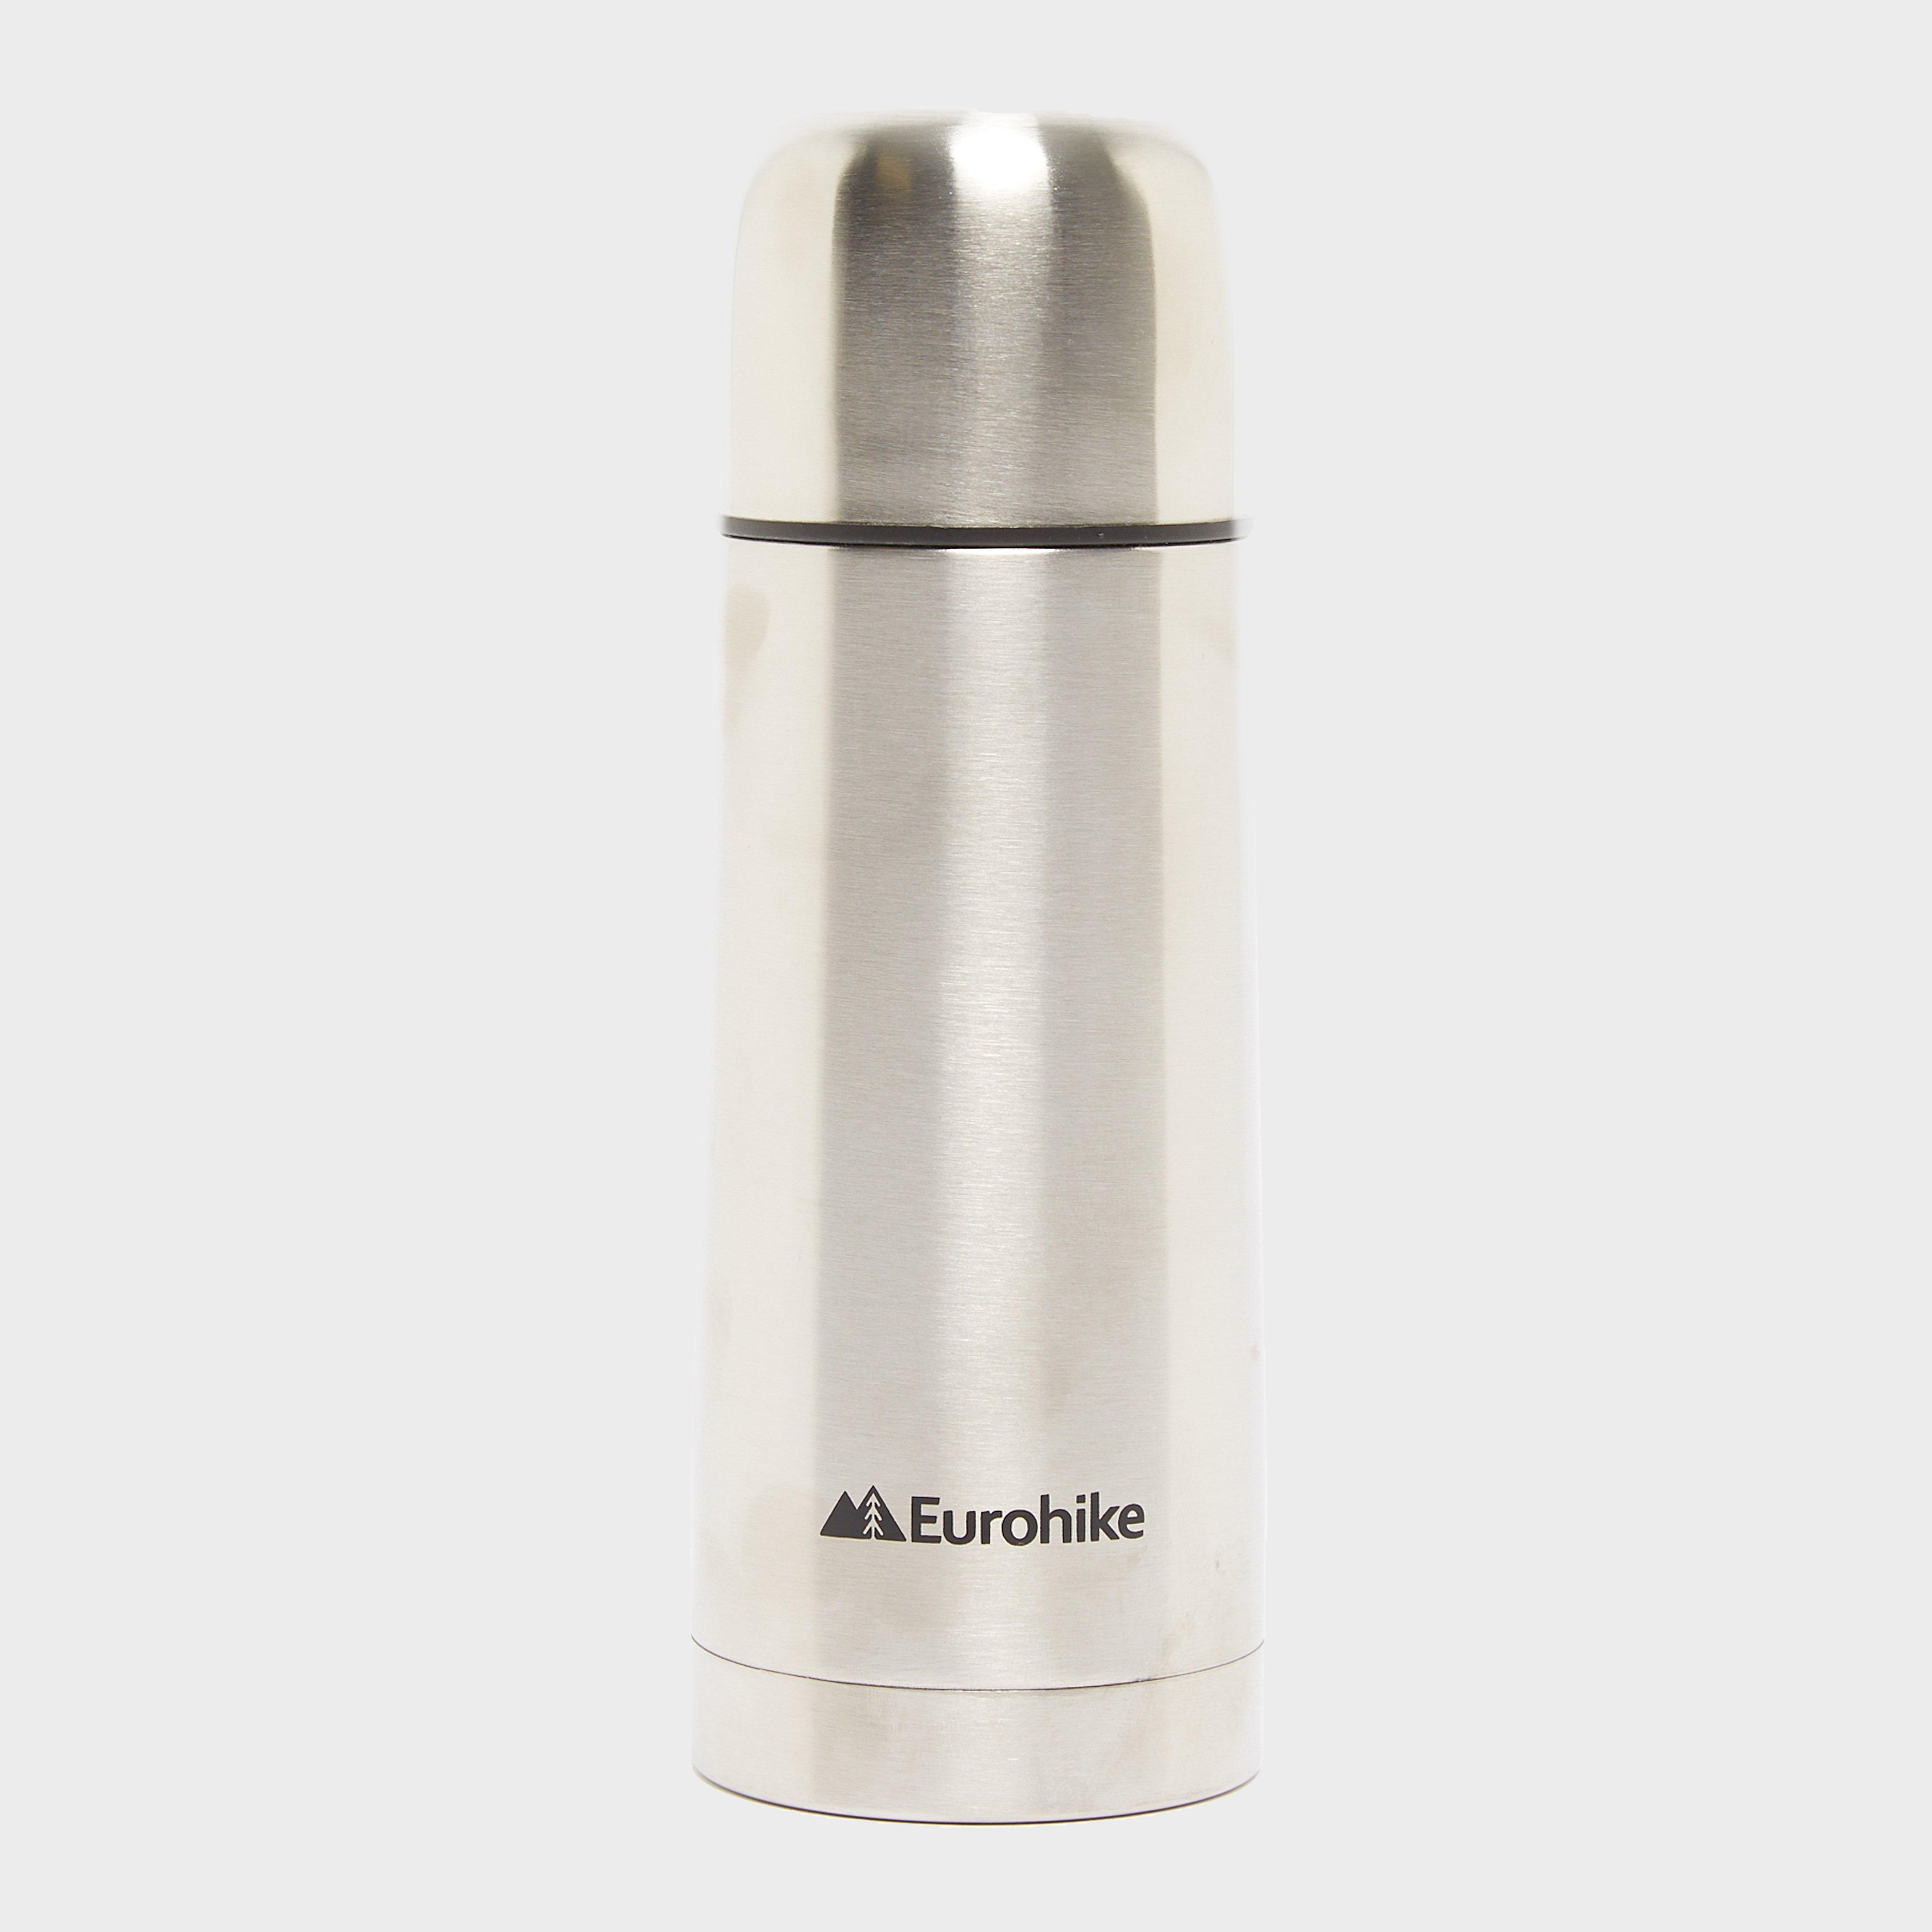 Hi-Gear Stainless Steel Flask Review